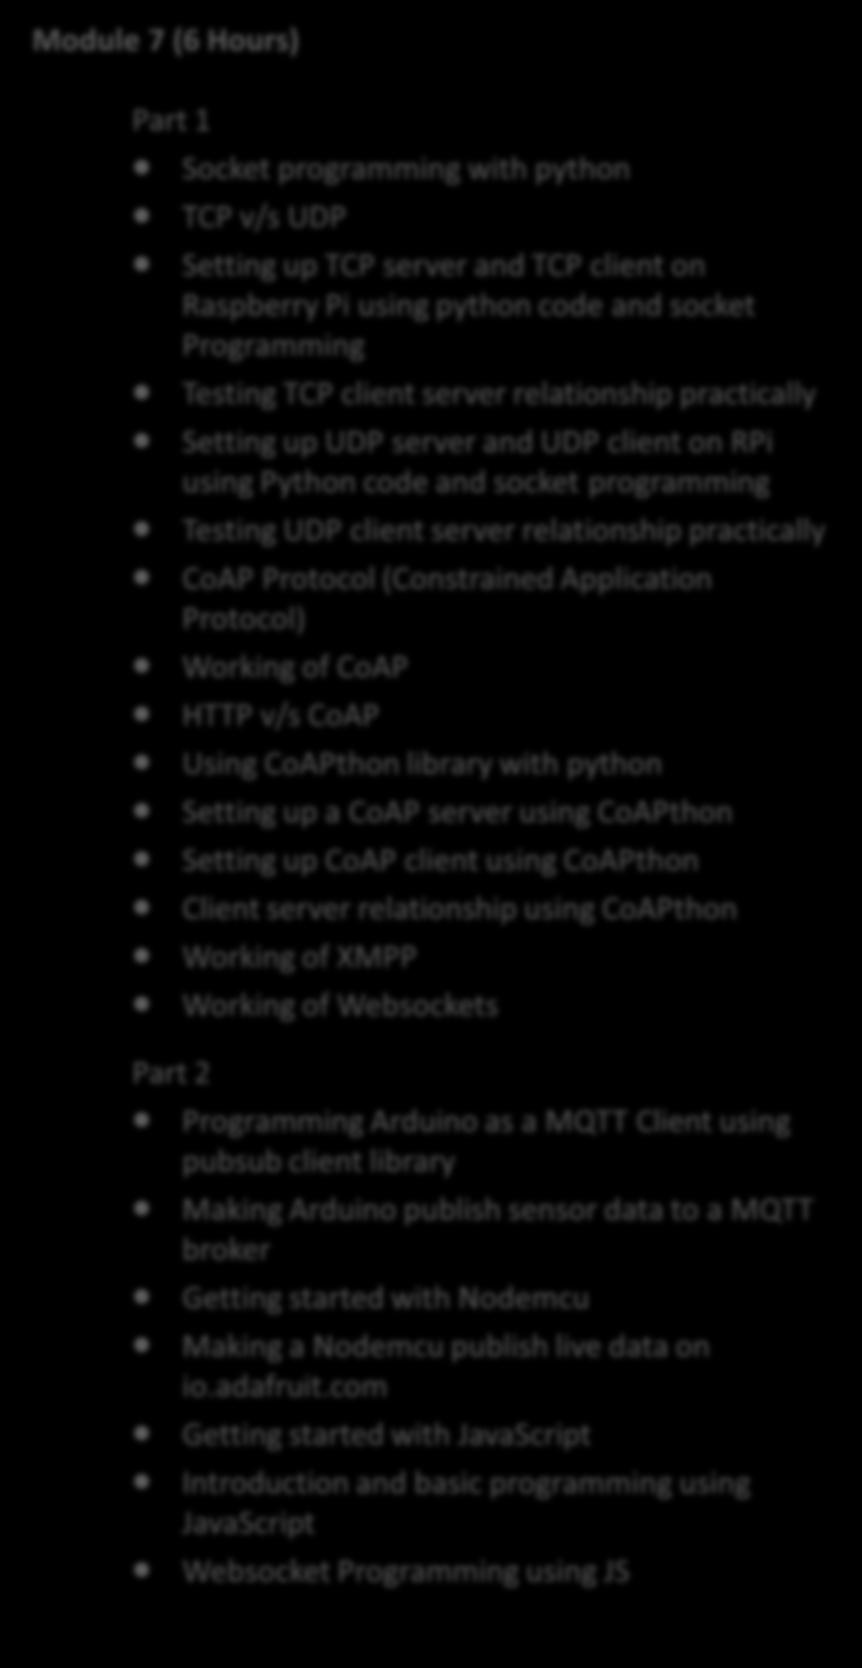 Module 7 (6 Hours) Socket programming with python TCP v/s UDP Setting up TCP server and TCP client on Raspberry Pi using python code and socket Programming Testing TCP client server relationship